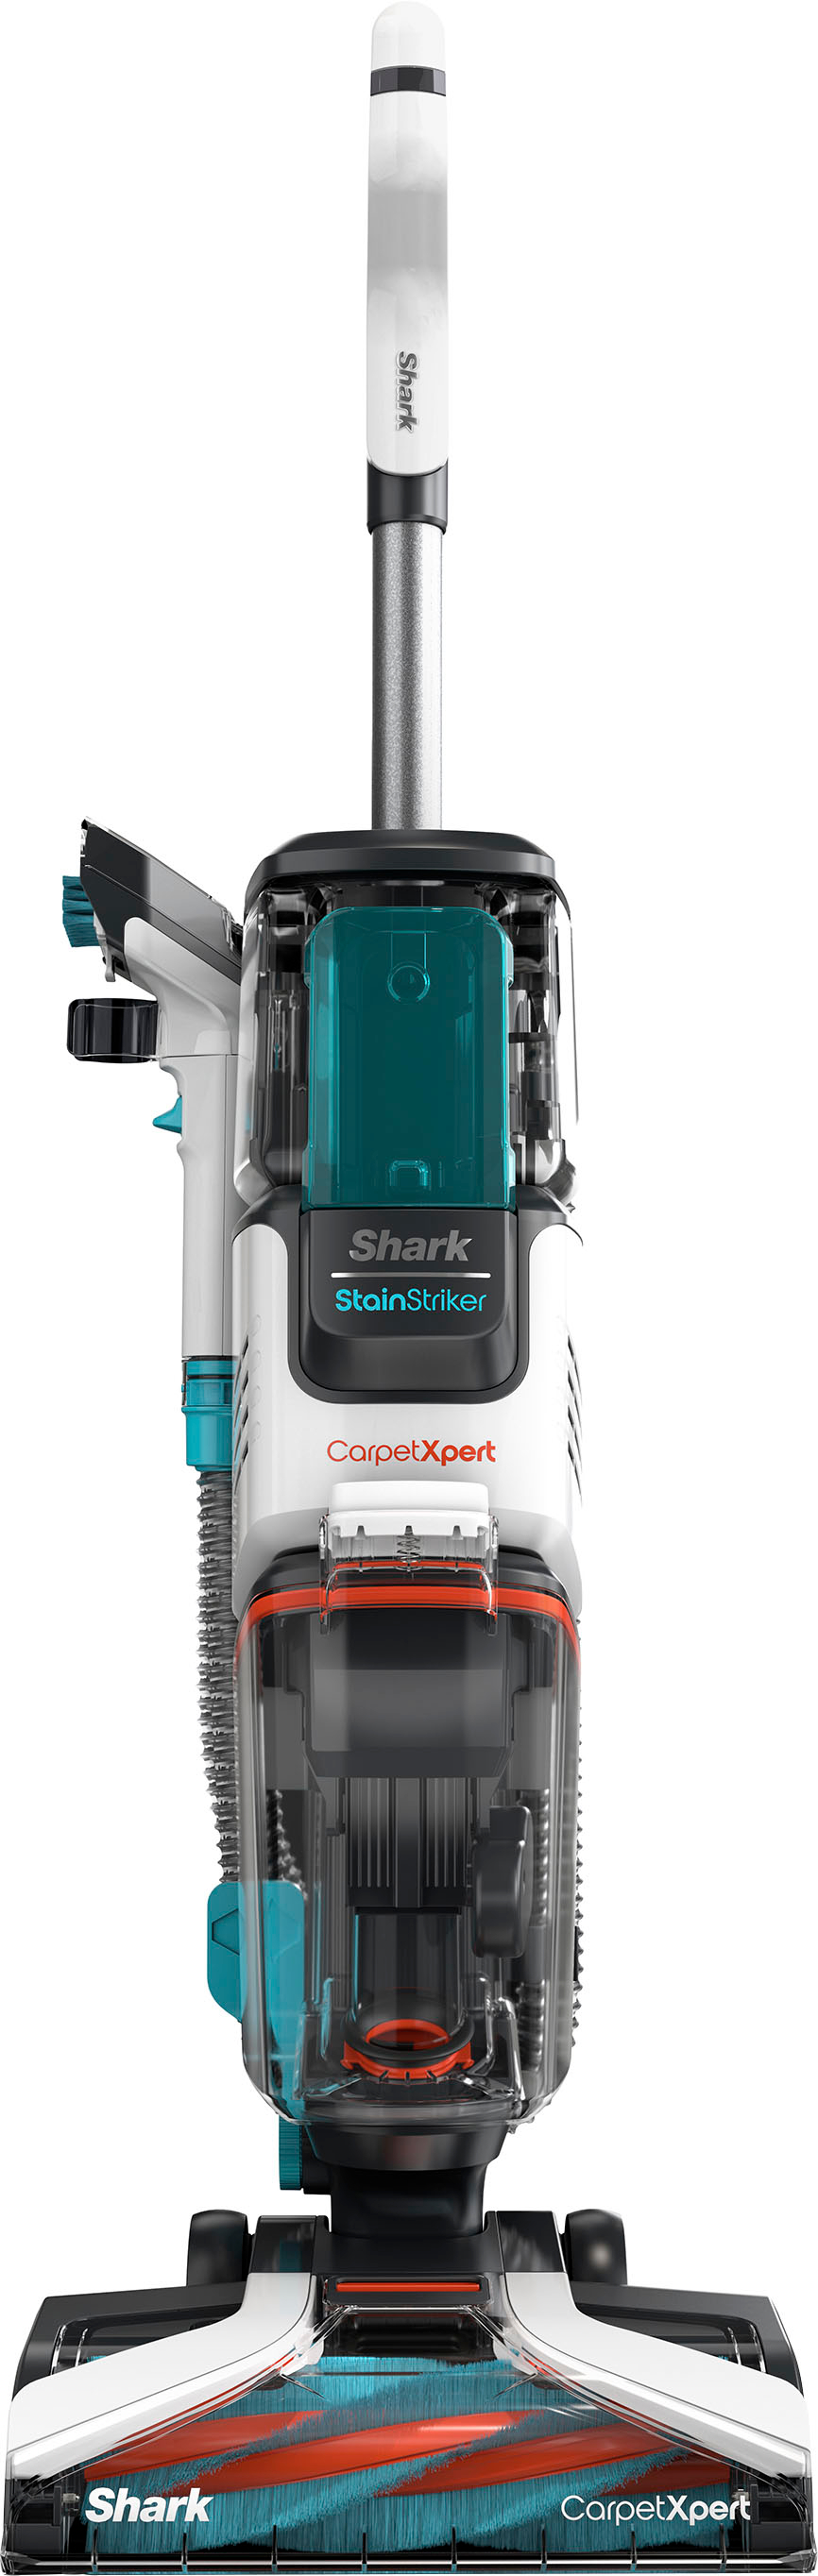 Angle View: Shark - CarpetXpert with Stainstriker Technology Corded Upright Deep Carpet and Upholstery Cleaner with Built-in Spot Remover - White